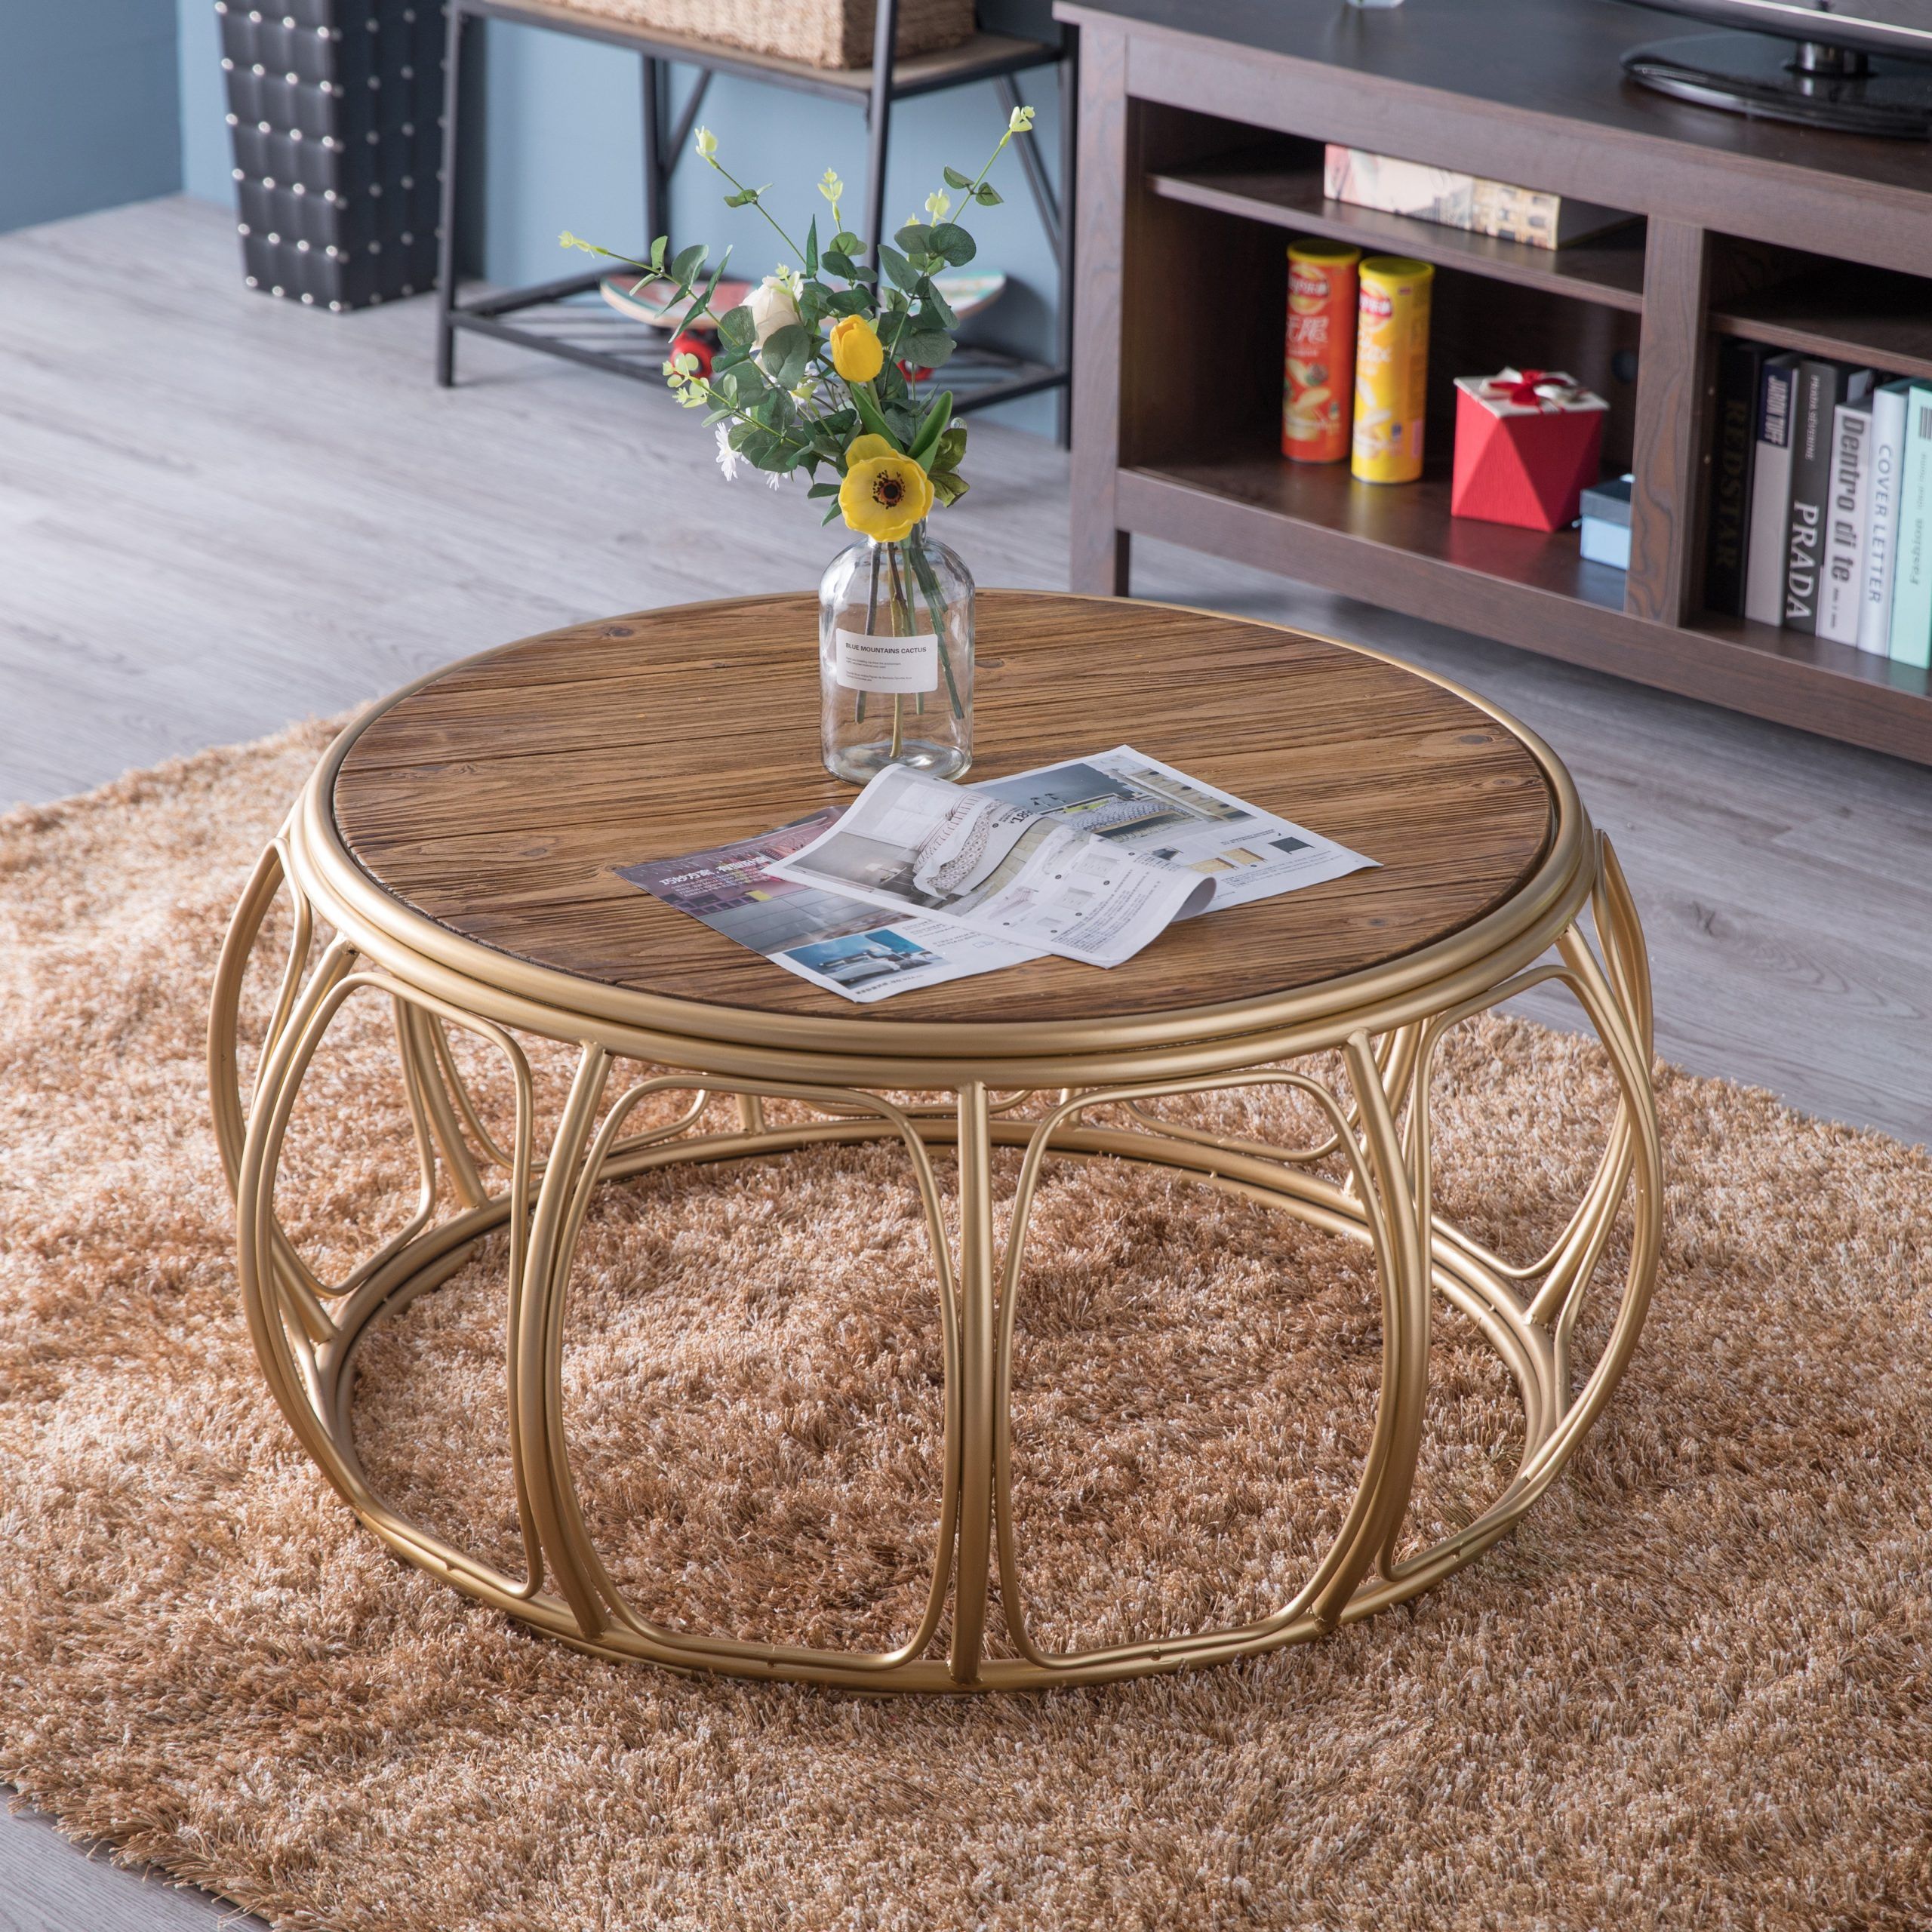 New Bold Tones Large Round Wood And Metal Coffee Table, Qi003517l | Ebay Intended For Coffee Tables With Round Wooden Tops (Gallery 19 of 20)